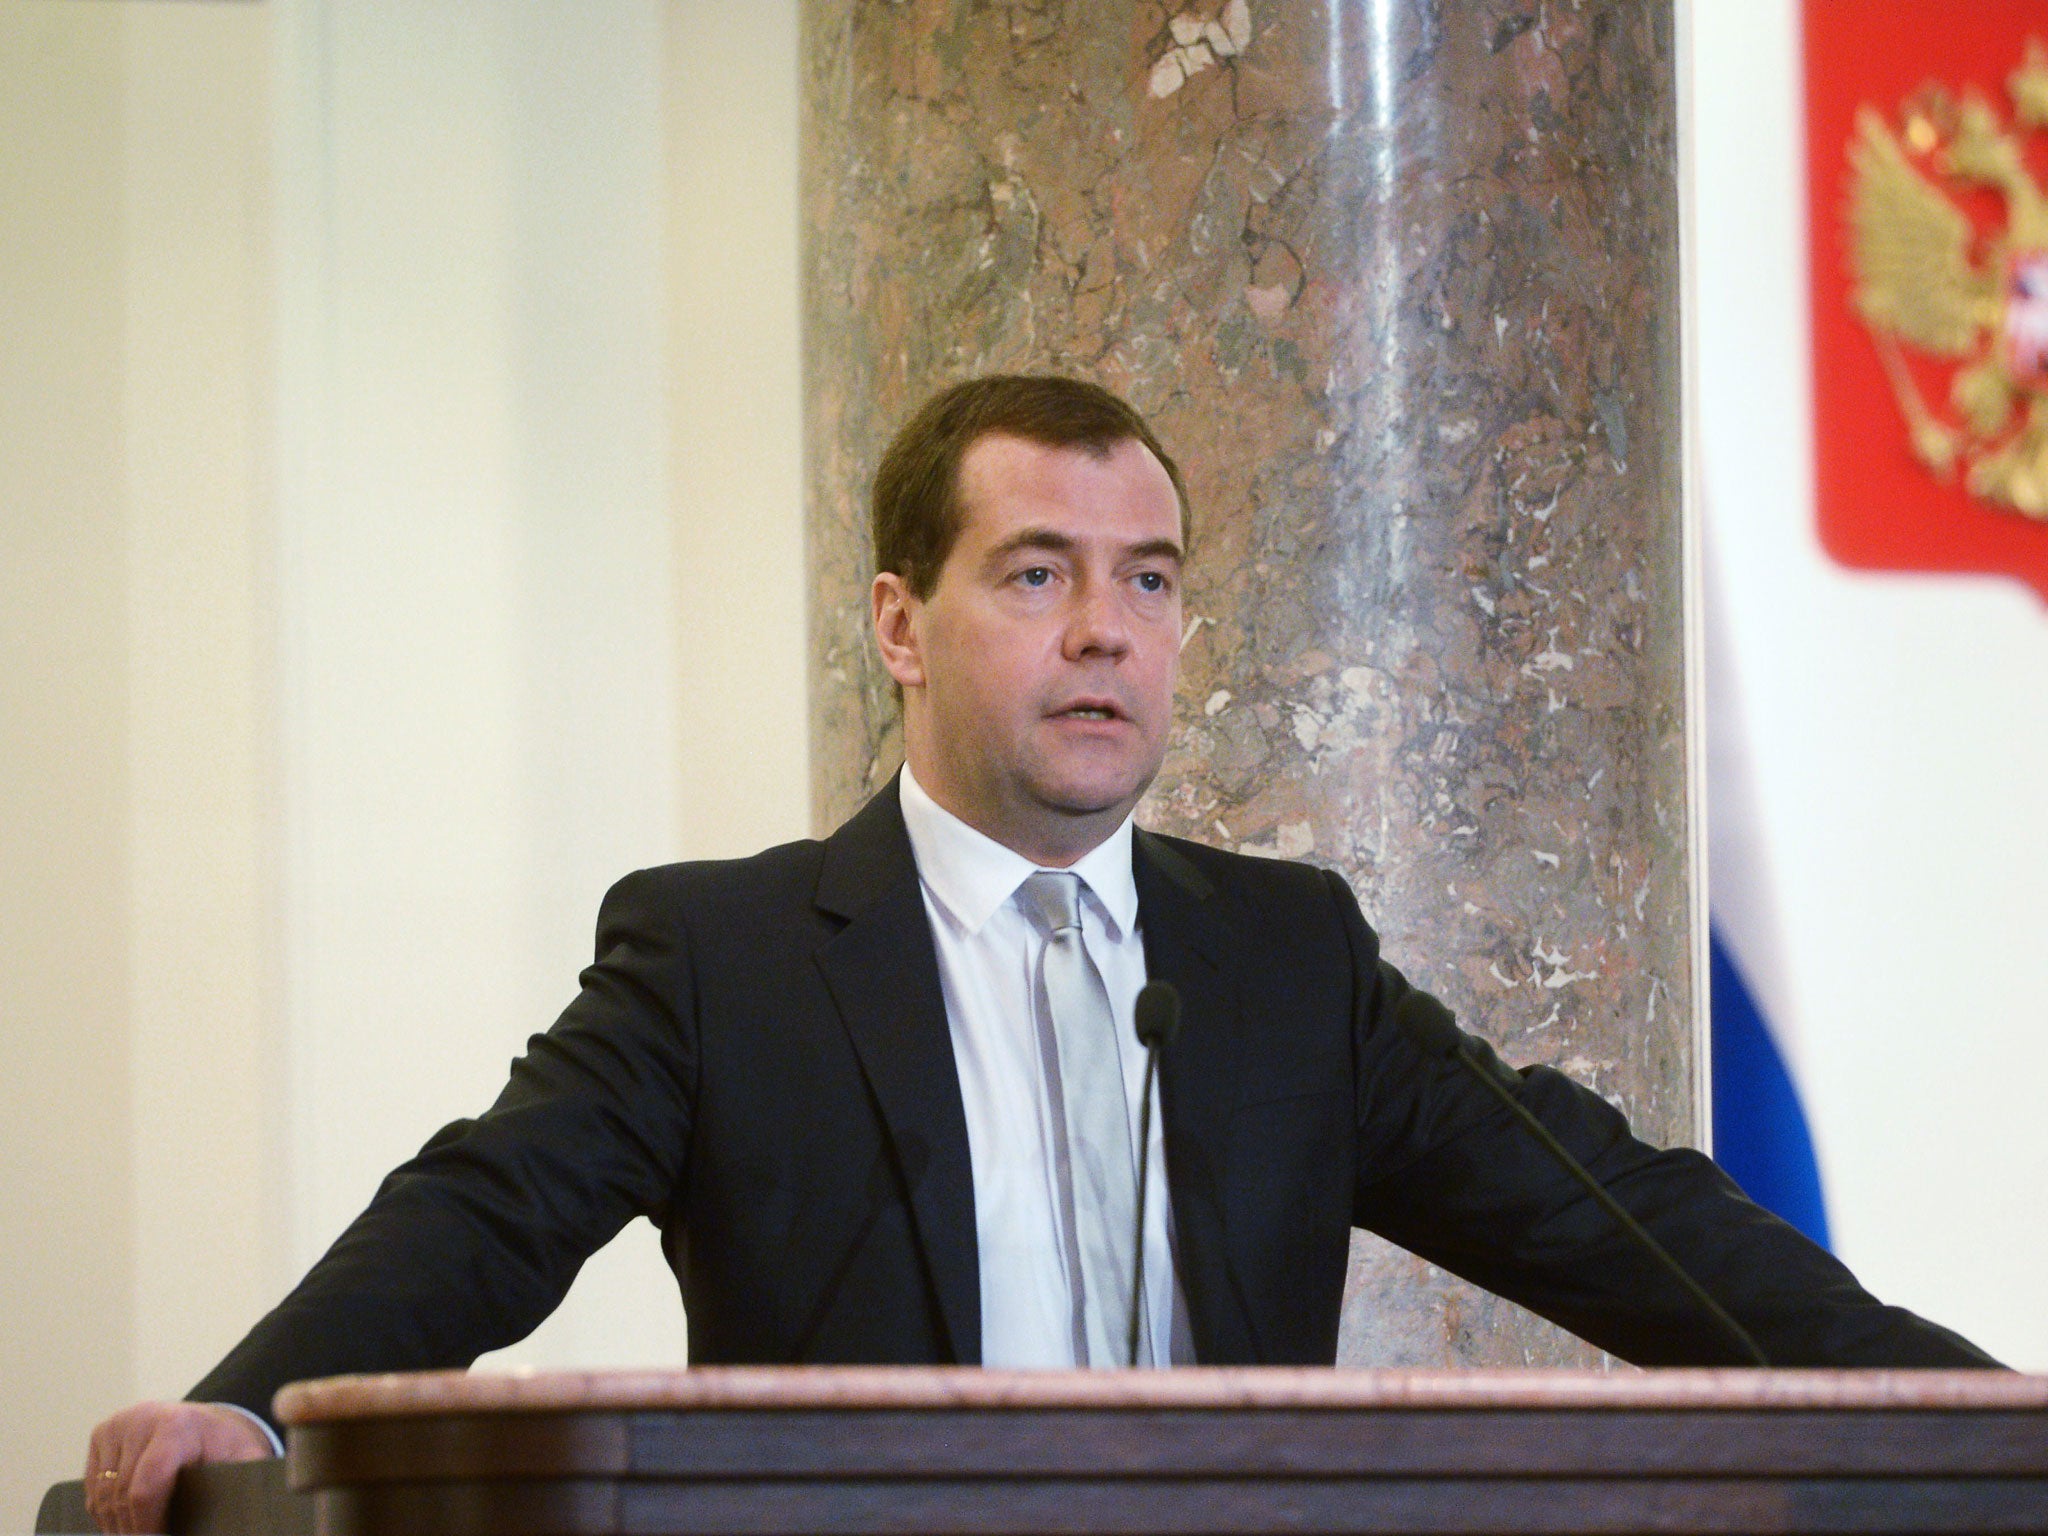 Russian Prime Minister Dmitry Medvedev pictured at the Ministry of Finance in Moscow